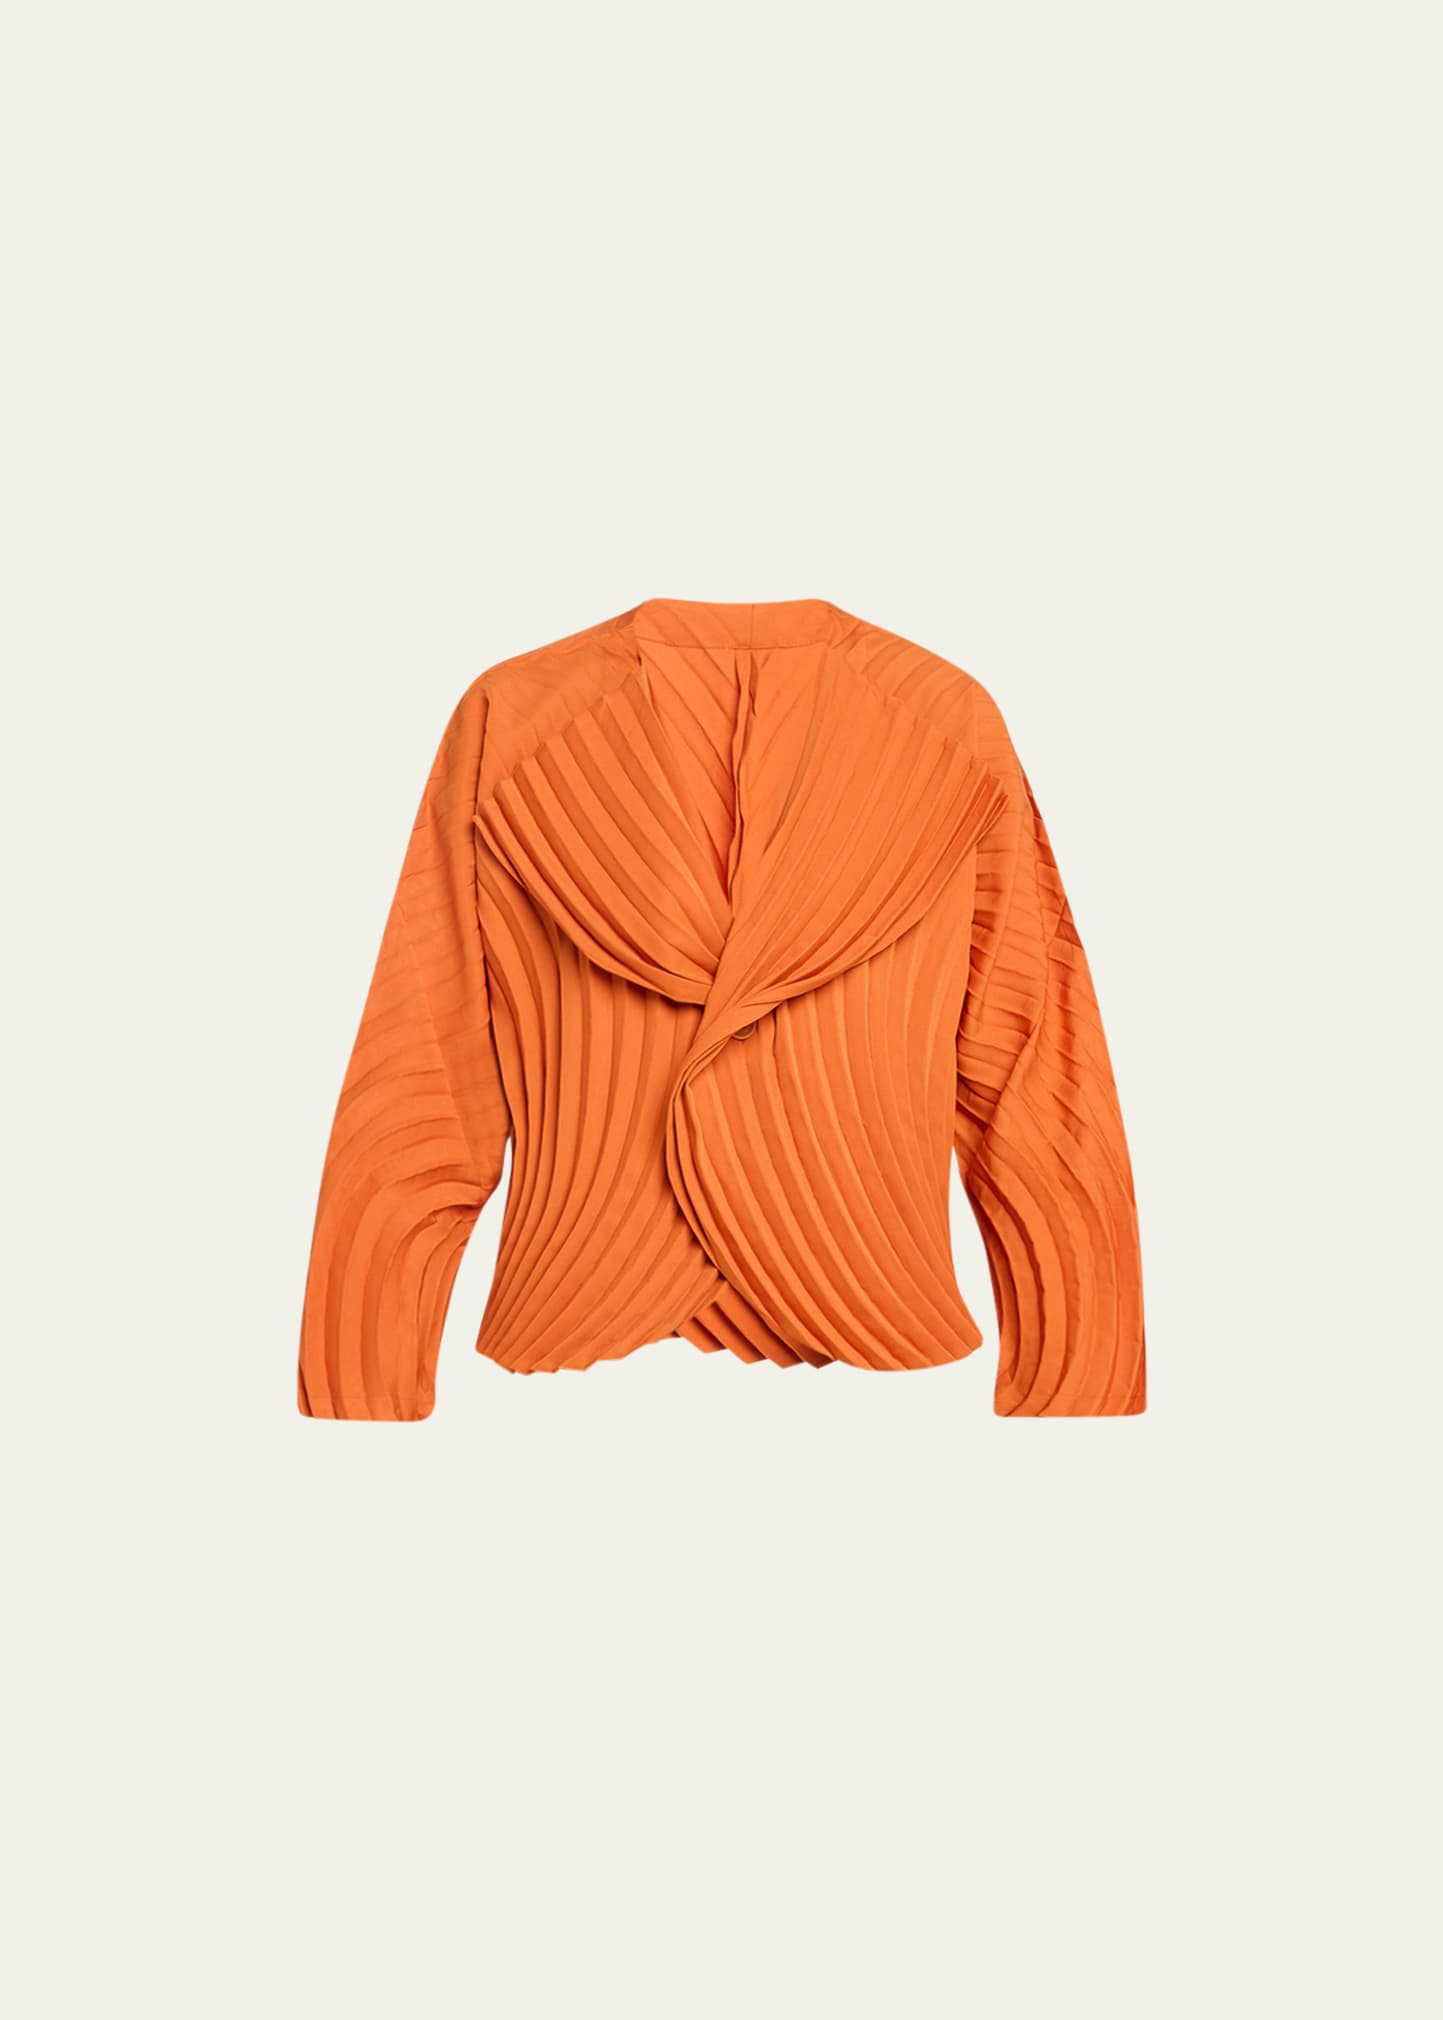 Issey Miyake Curved Pleats Jacket In Terracotta